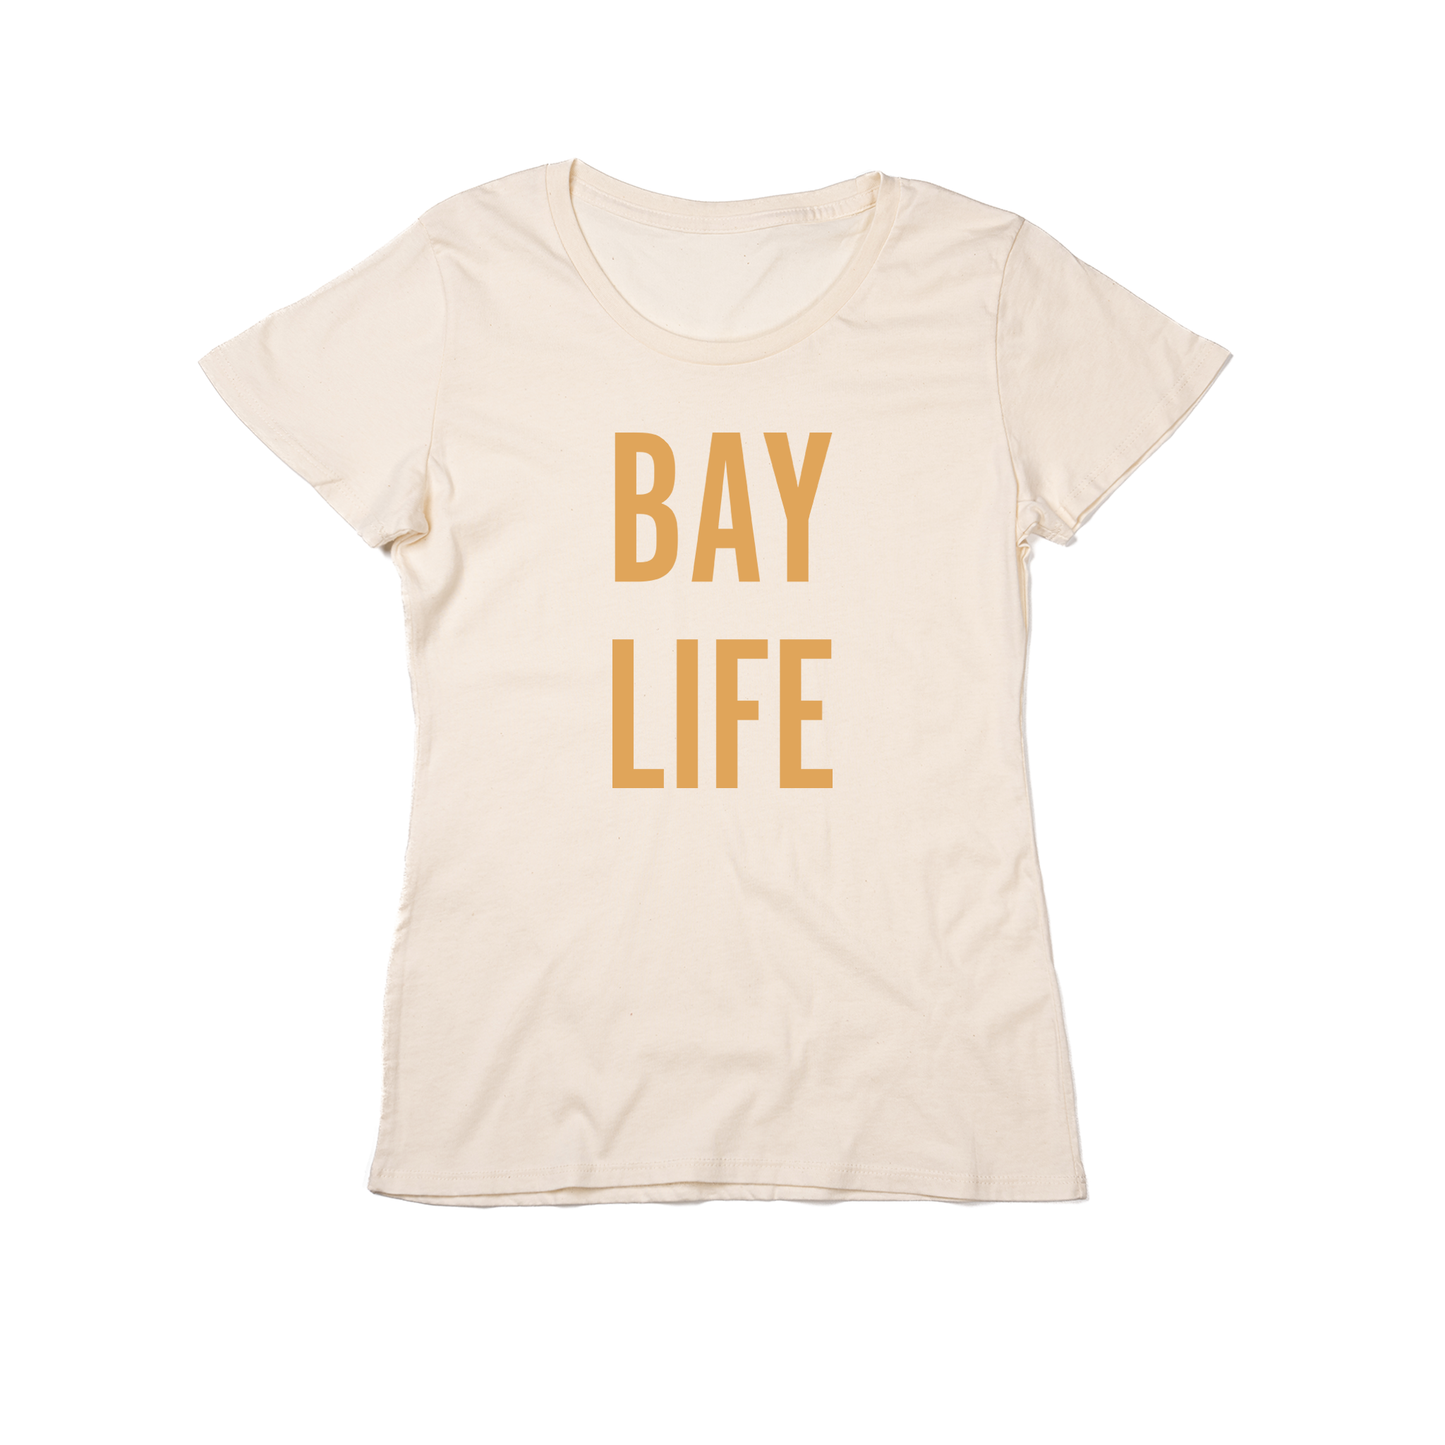 Bay Life (Mustard) - Women's Fitted Tee (Natural)